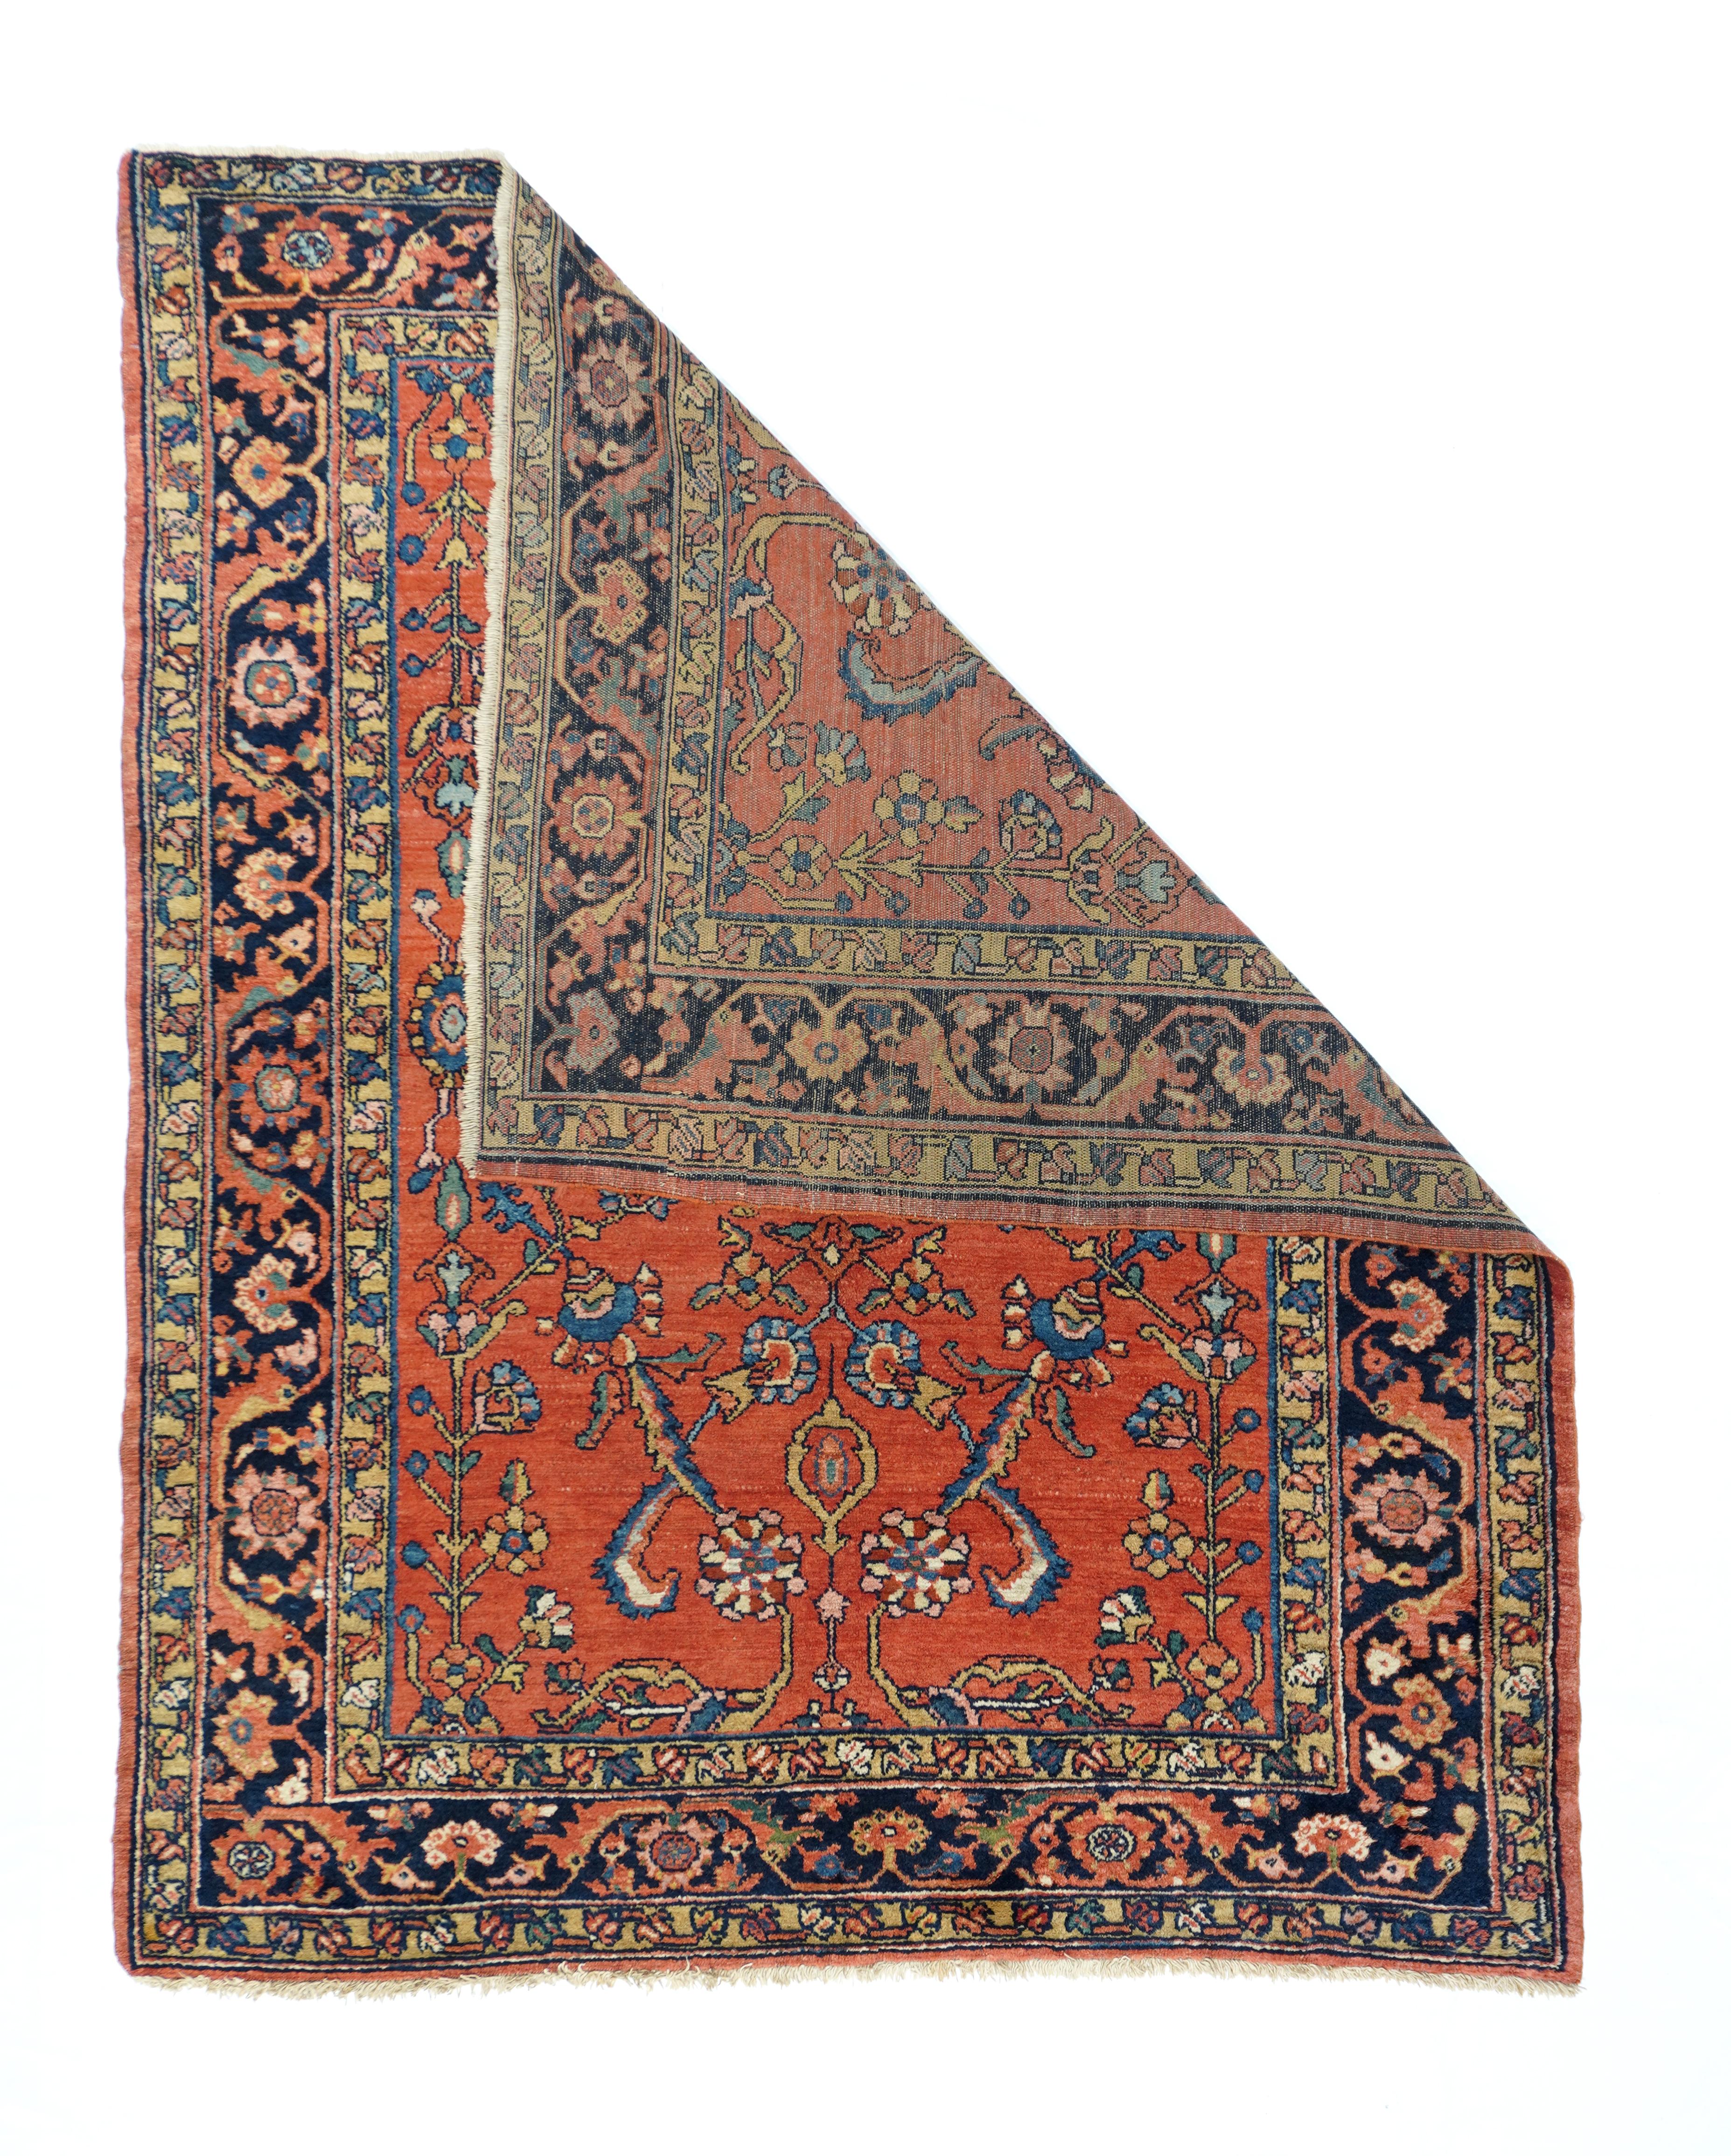 Antique Iran Lillihan wool on Cotton 5'2'' x 6'4''. Lillihan is one of the best weaving villages in the Greater Hamadan Weaving Region and specialized in rust red scatters and runners with detached floral spray patterns in the general 